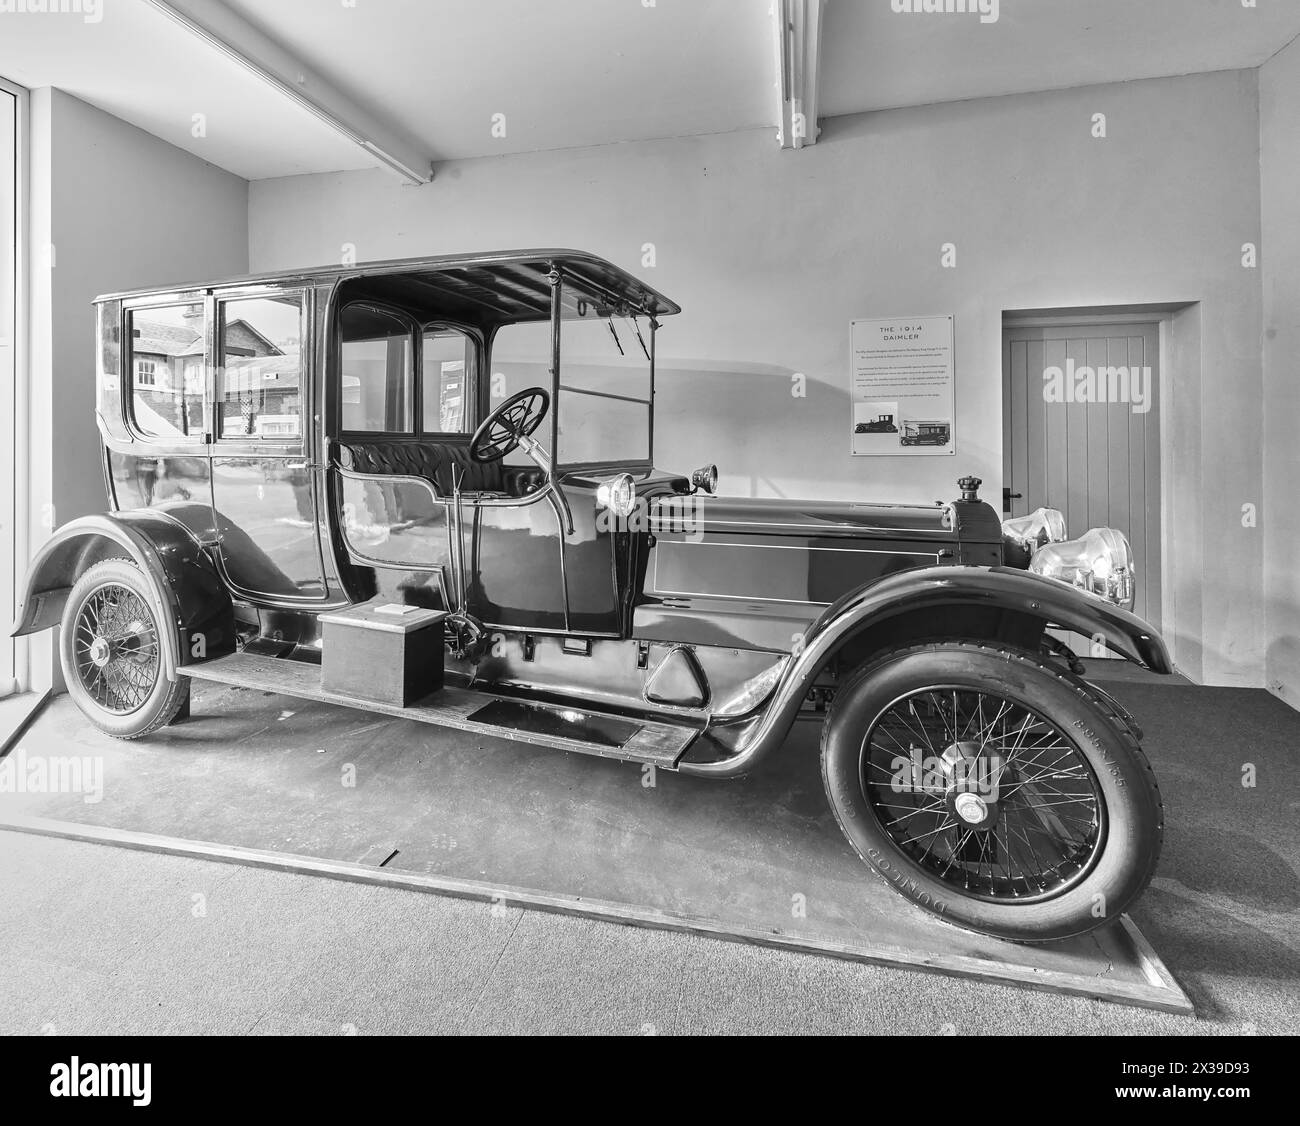 1914 Daimler car, bought by king George V, in a garage at the country residence of the british monarch, Sandringham House,  England. Stock Photo